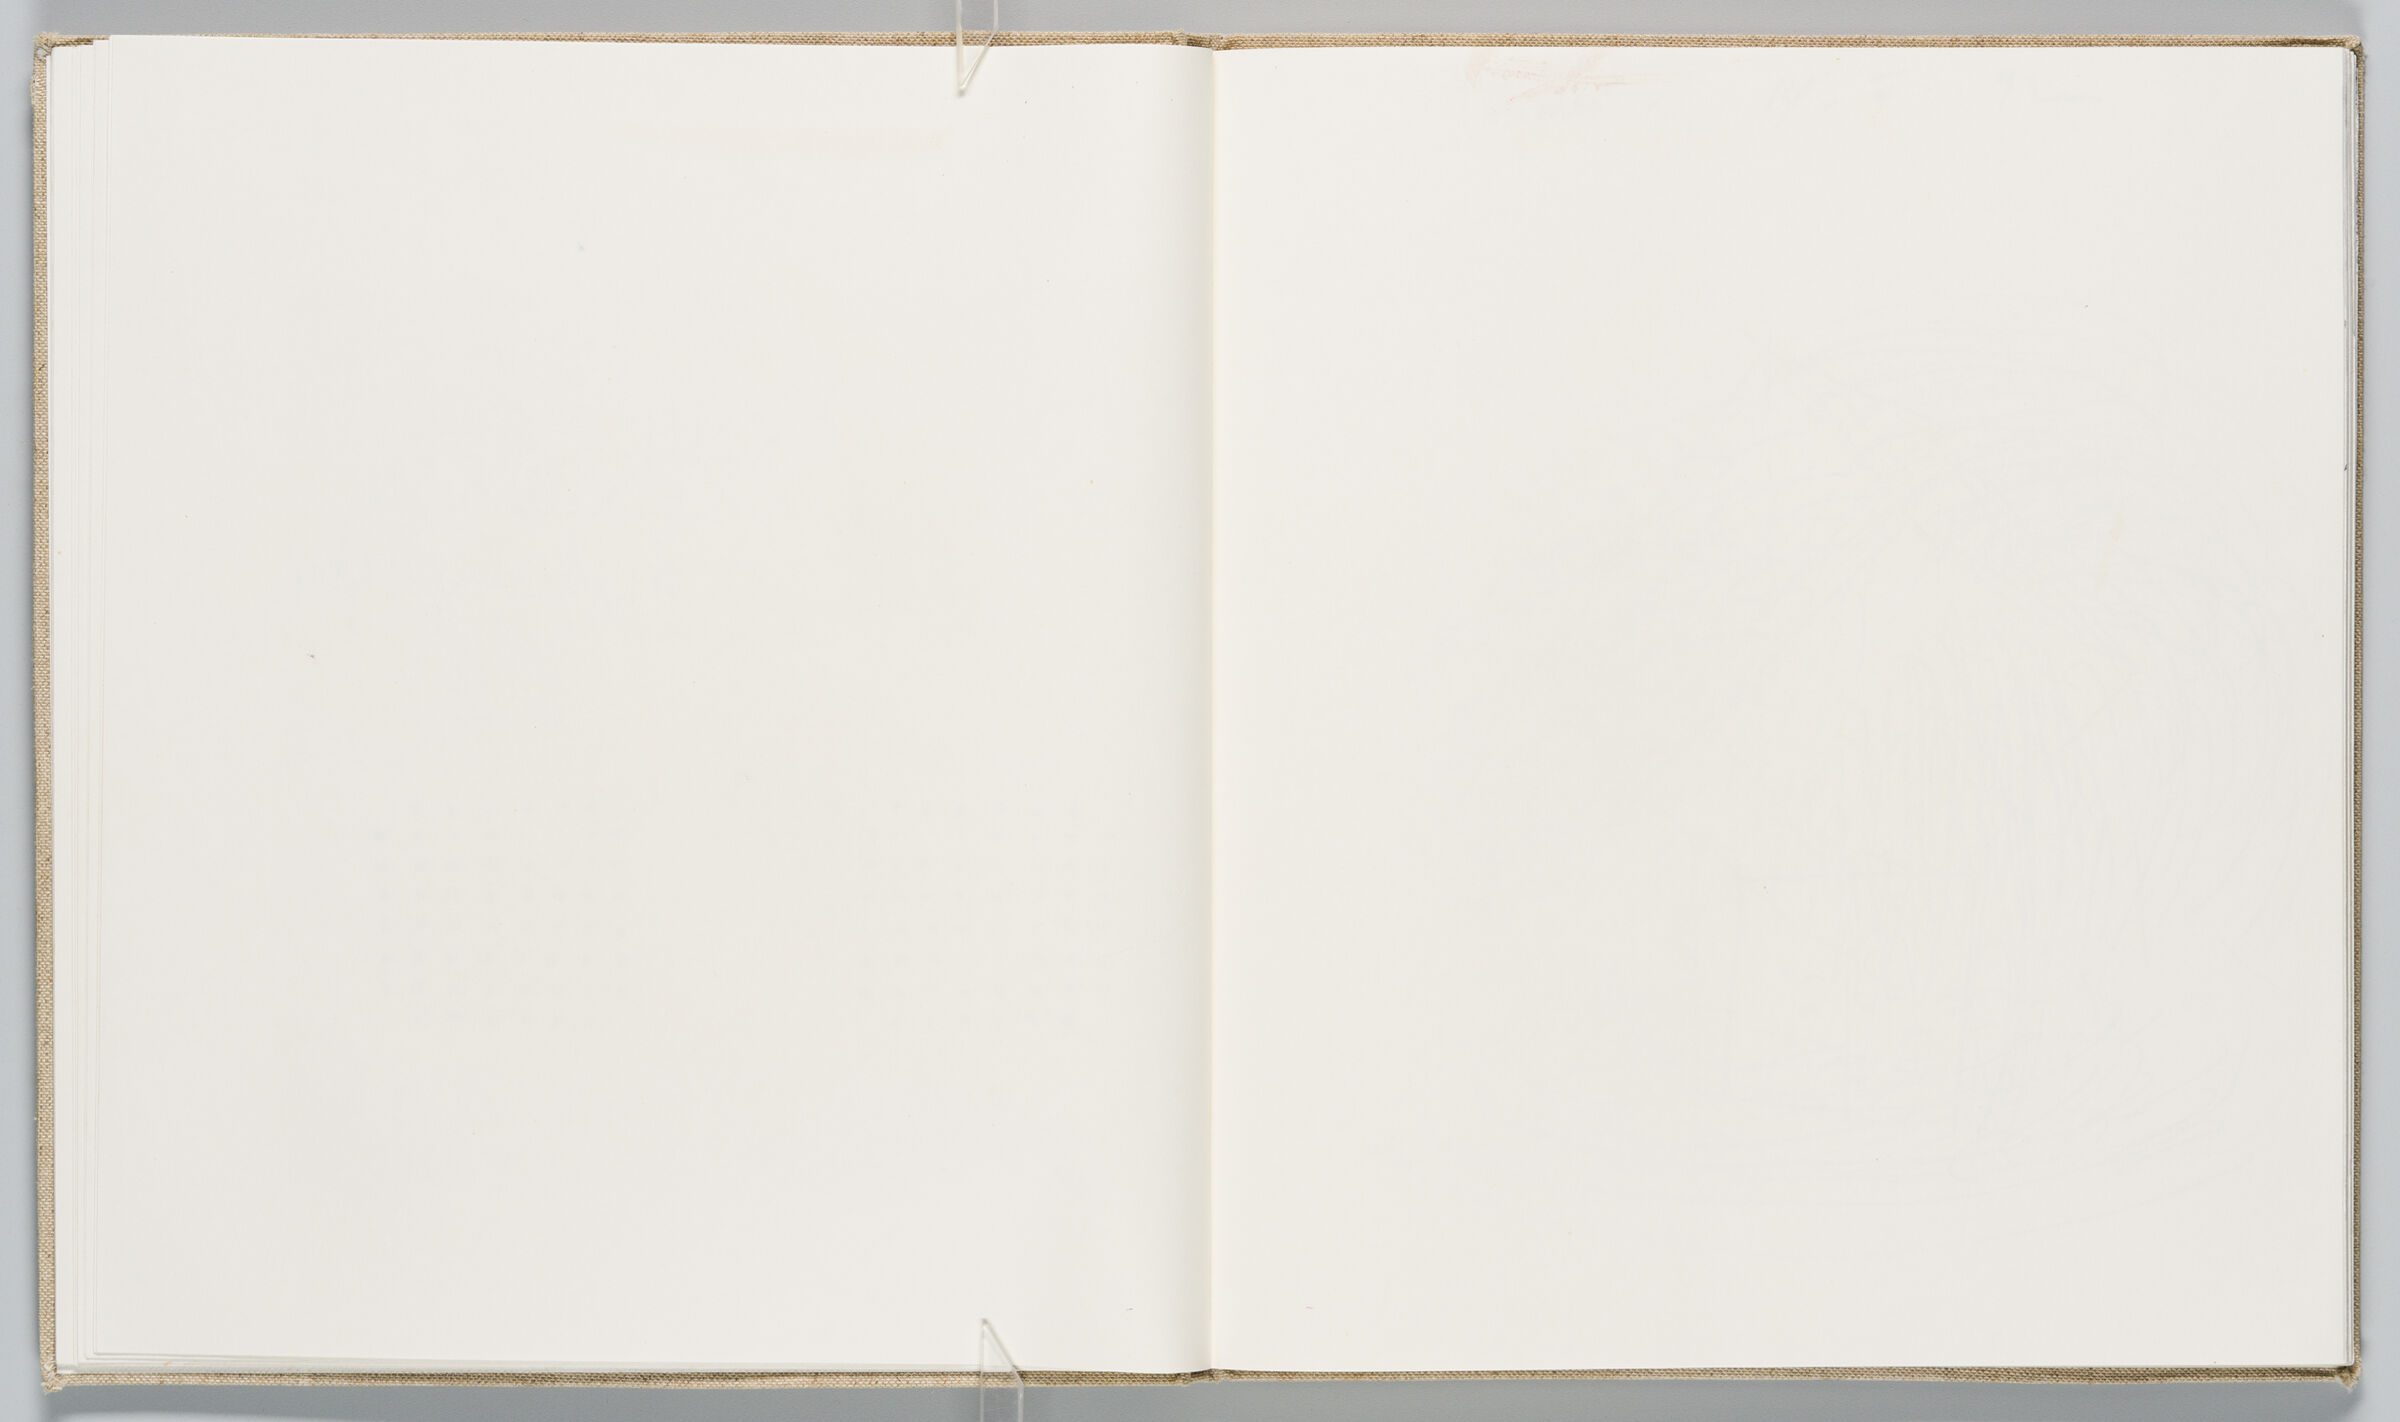 Untitled (Blank, Left Page); Untitled (Blank With Adhesive Traces, Right Page)